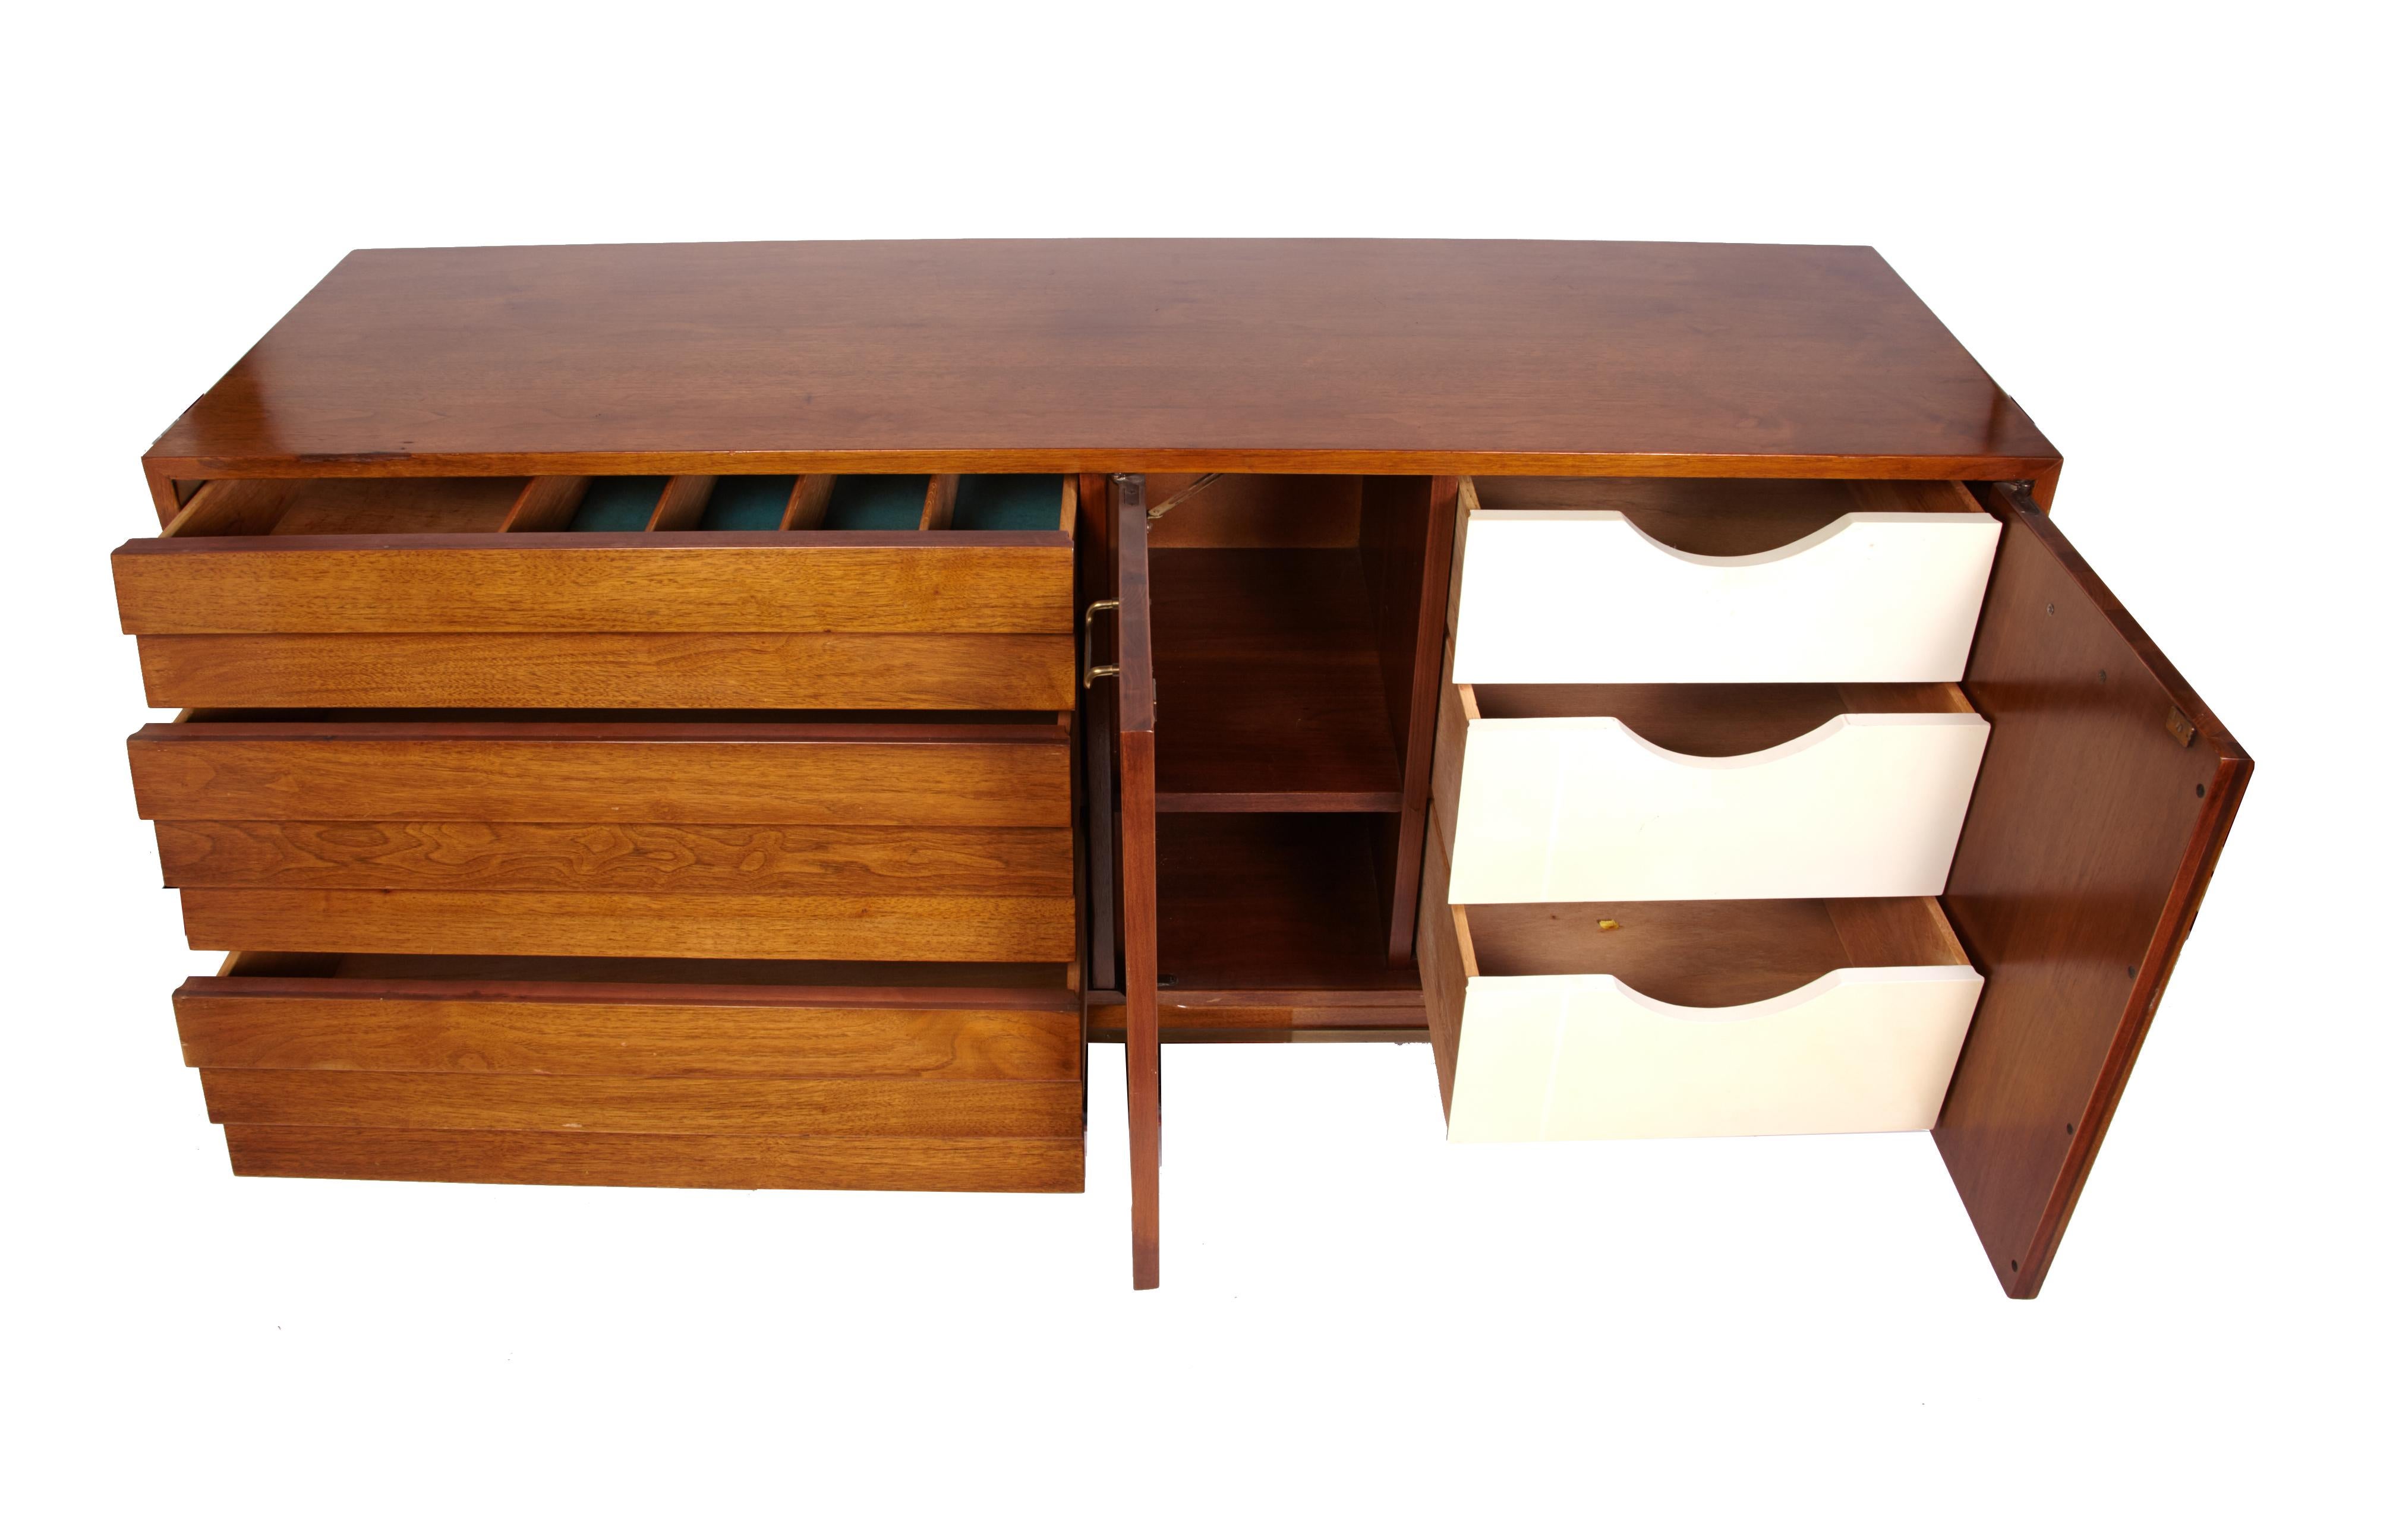 A beautiful Mid-Century Modern walnut dresser designed by Merton Gershun for American of Martinsville with louvered drawers and polished brass drawer pulls.
In excellent original condition. The doors on the right open to reveal 3 white front